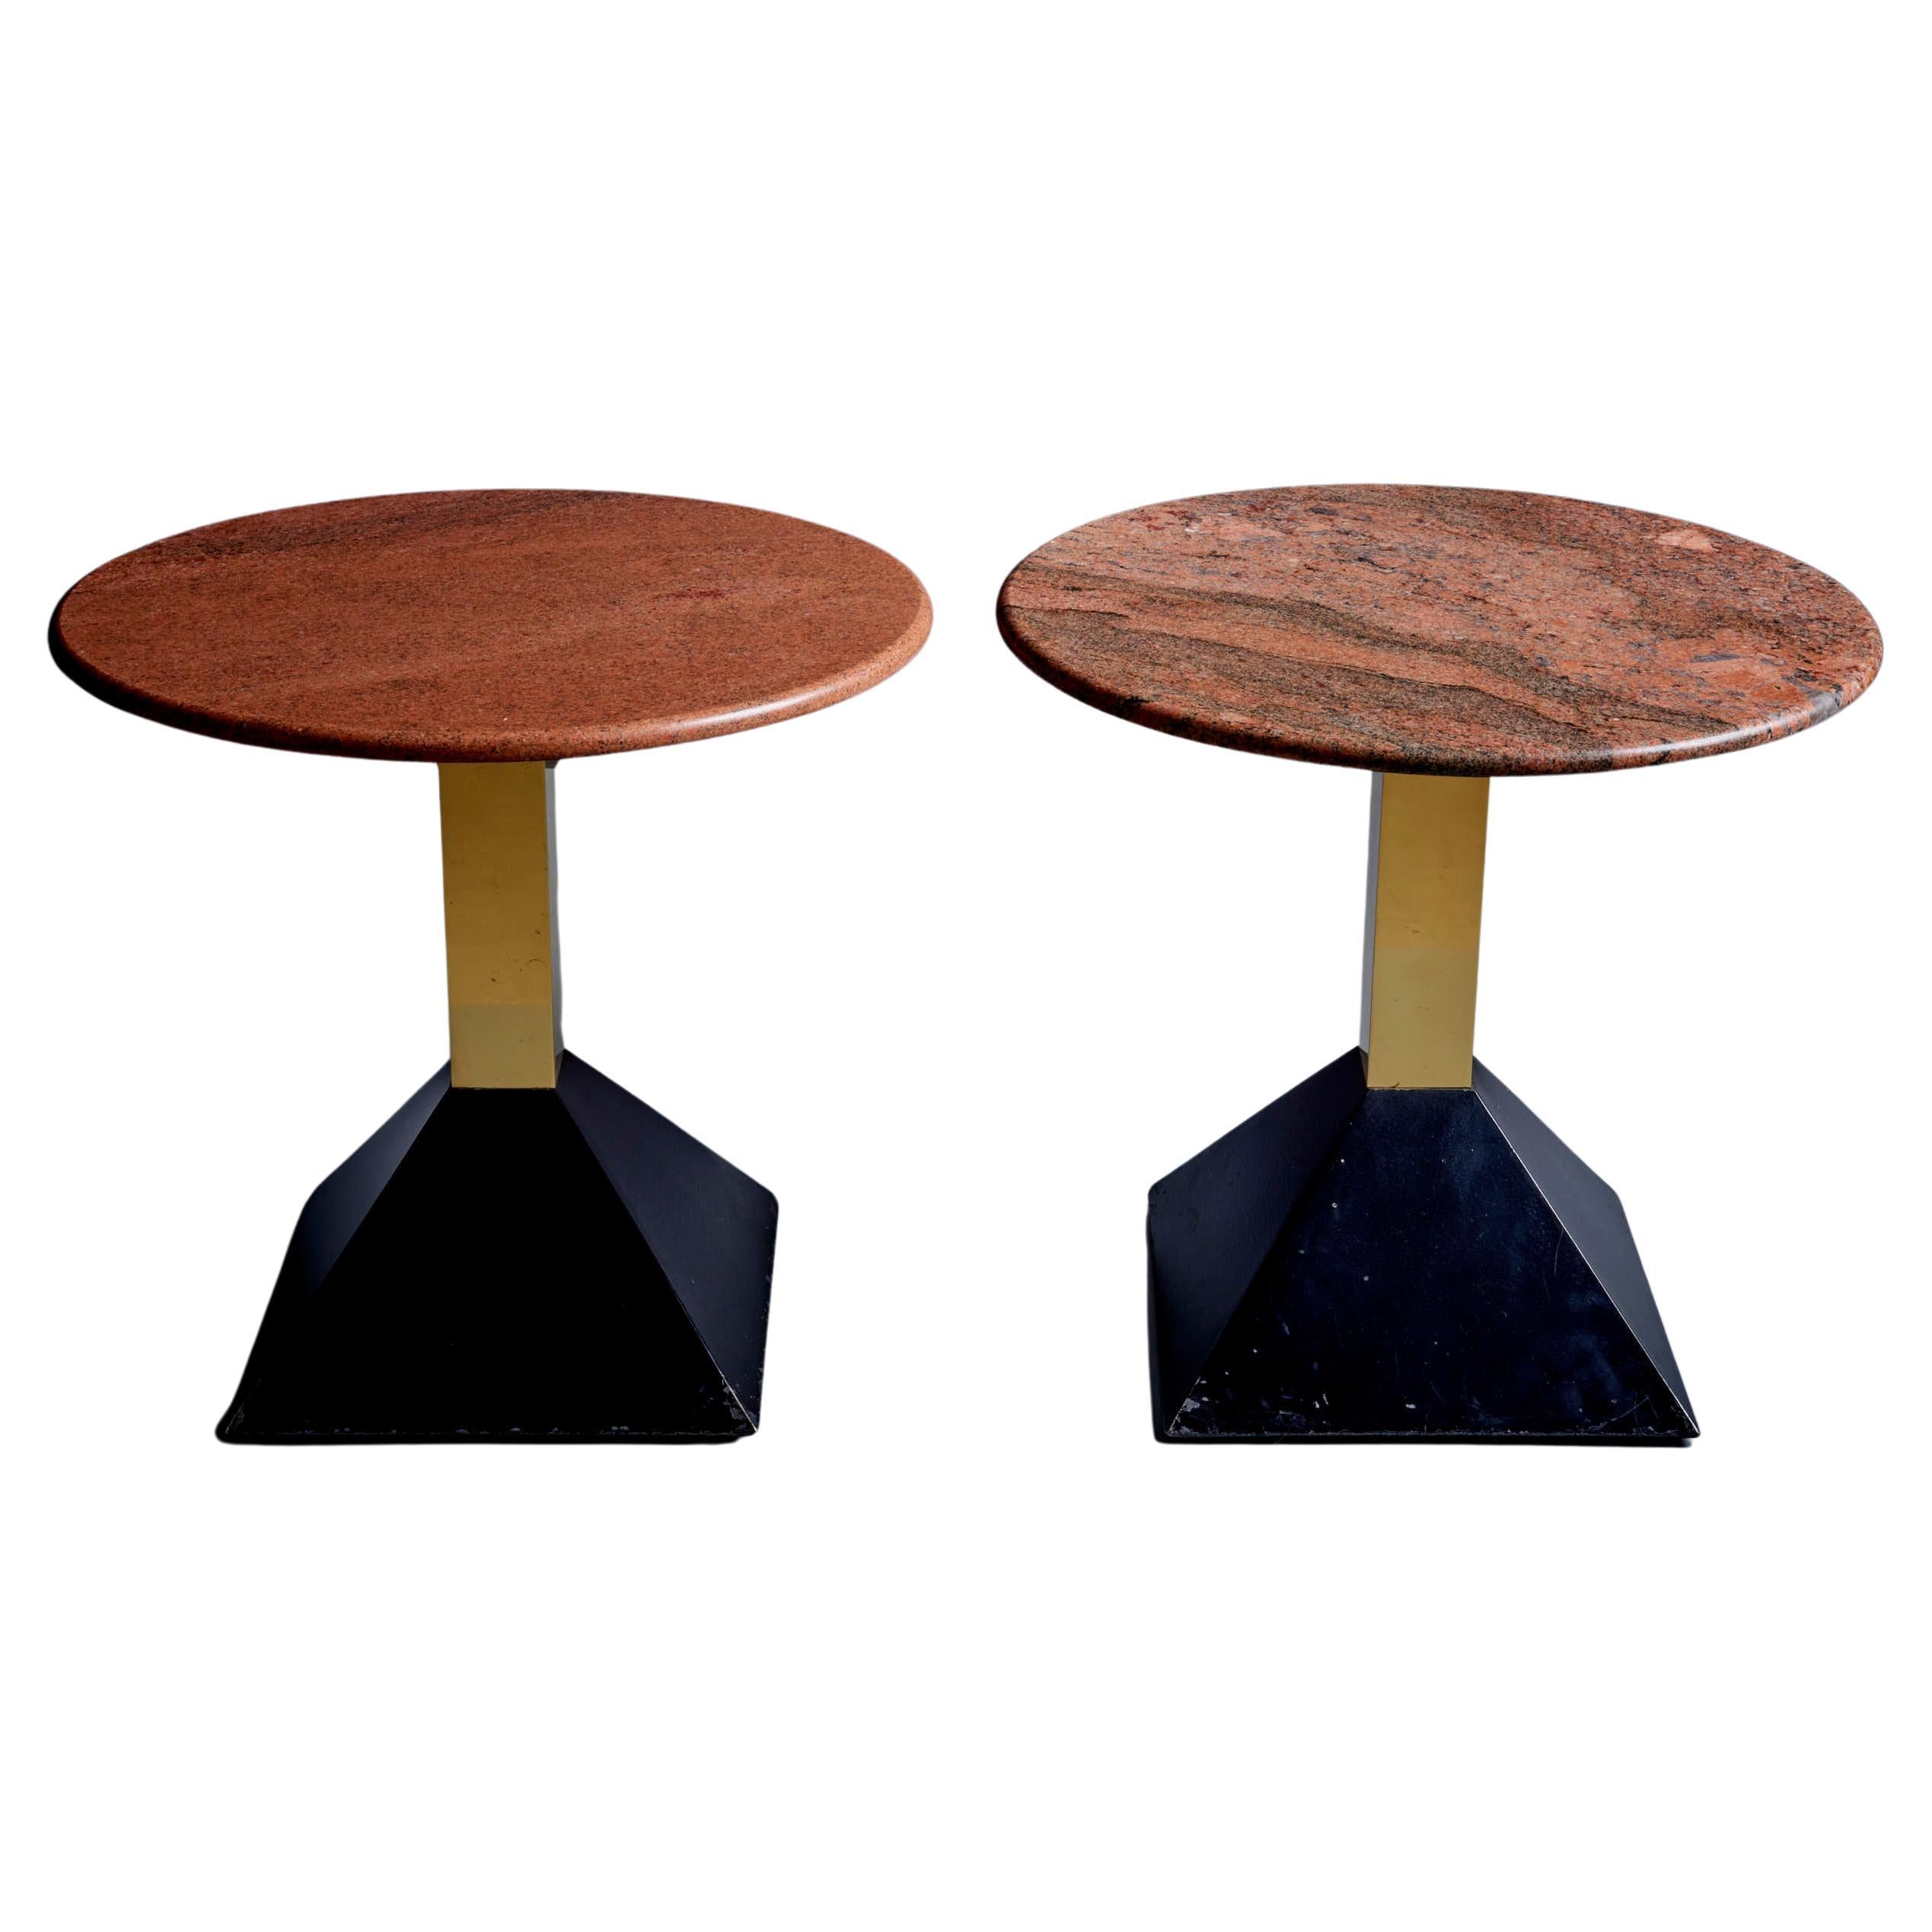 Pair of Red Granite Side Tables, Italy, 1950s For Sale